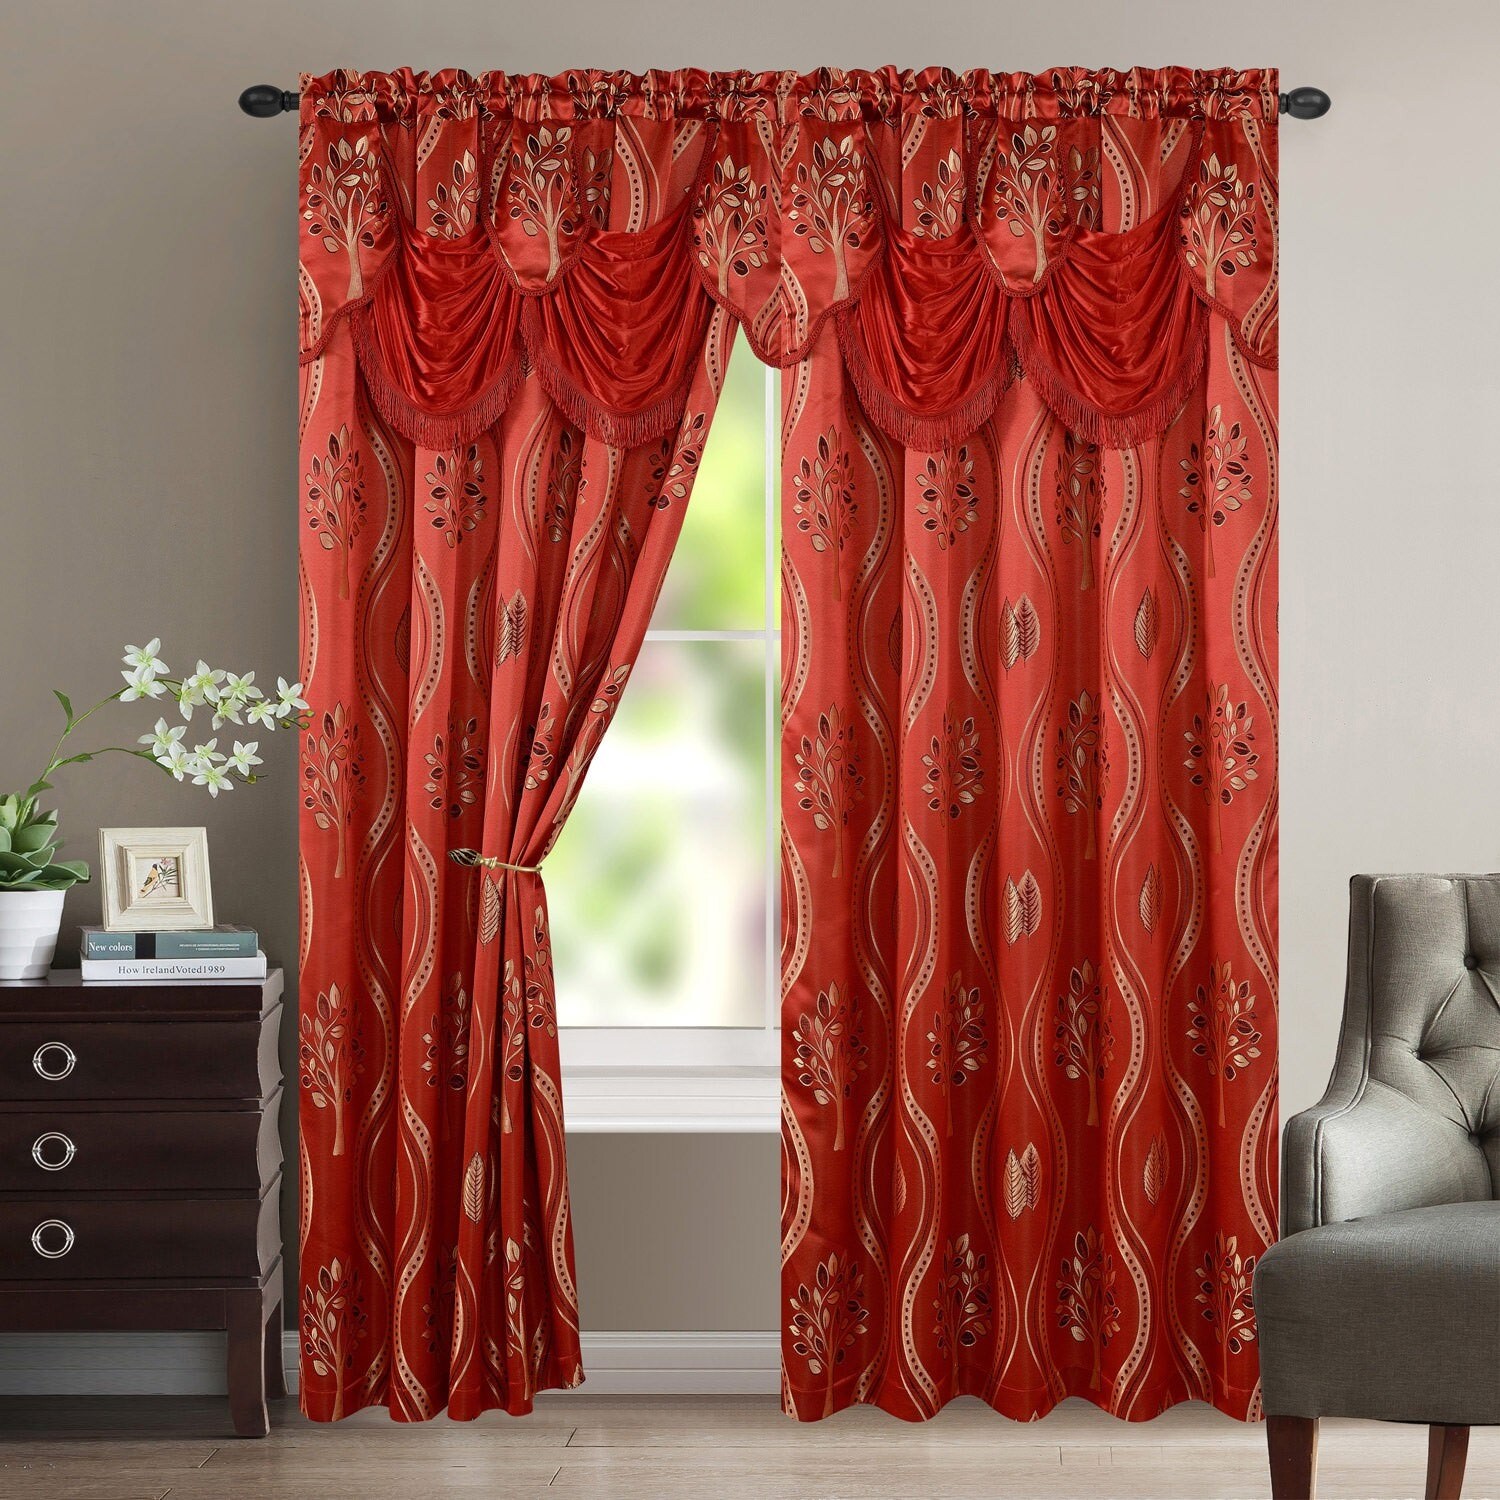 6 Pcs Victorian Sytle Curtain Set 2 Panels Attached Valance & Backing BURGUNDY 